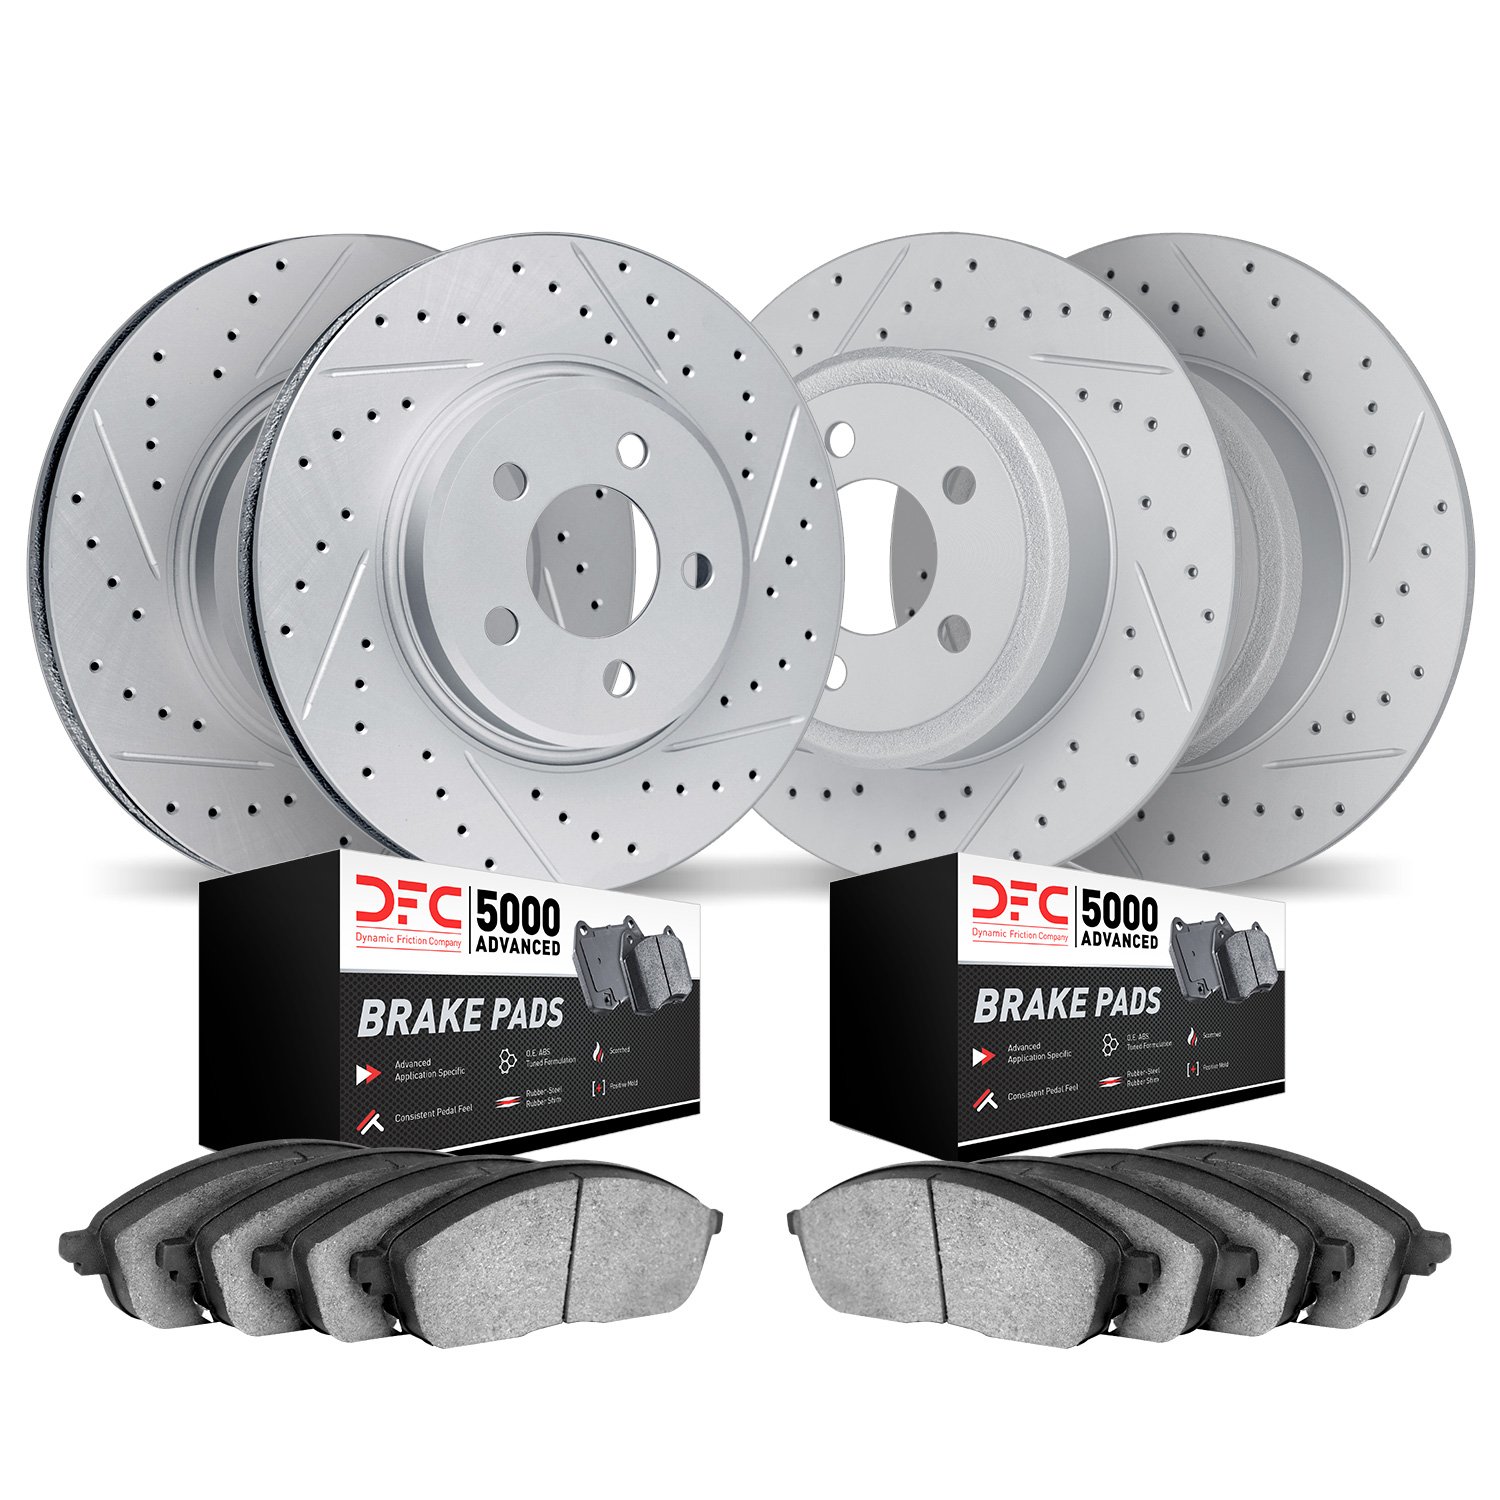 2504-32008 Geoperformance Drilled/Slotted Rotors w/5000 Advanced Brake Pads Kit, 2013-2016 Mini, Position: Front and Rear